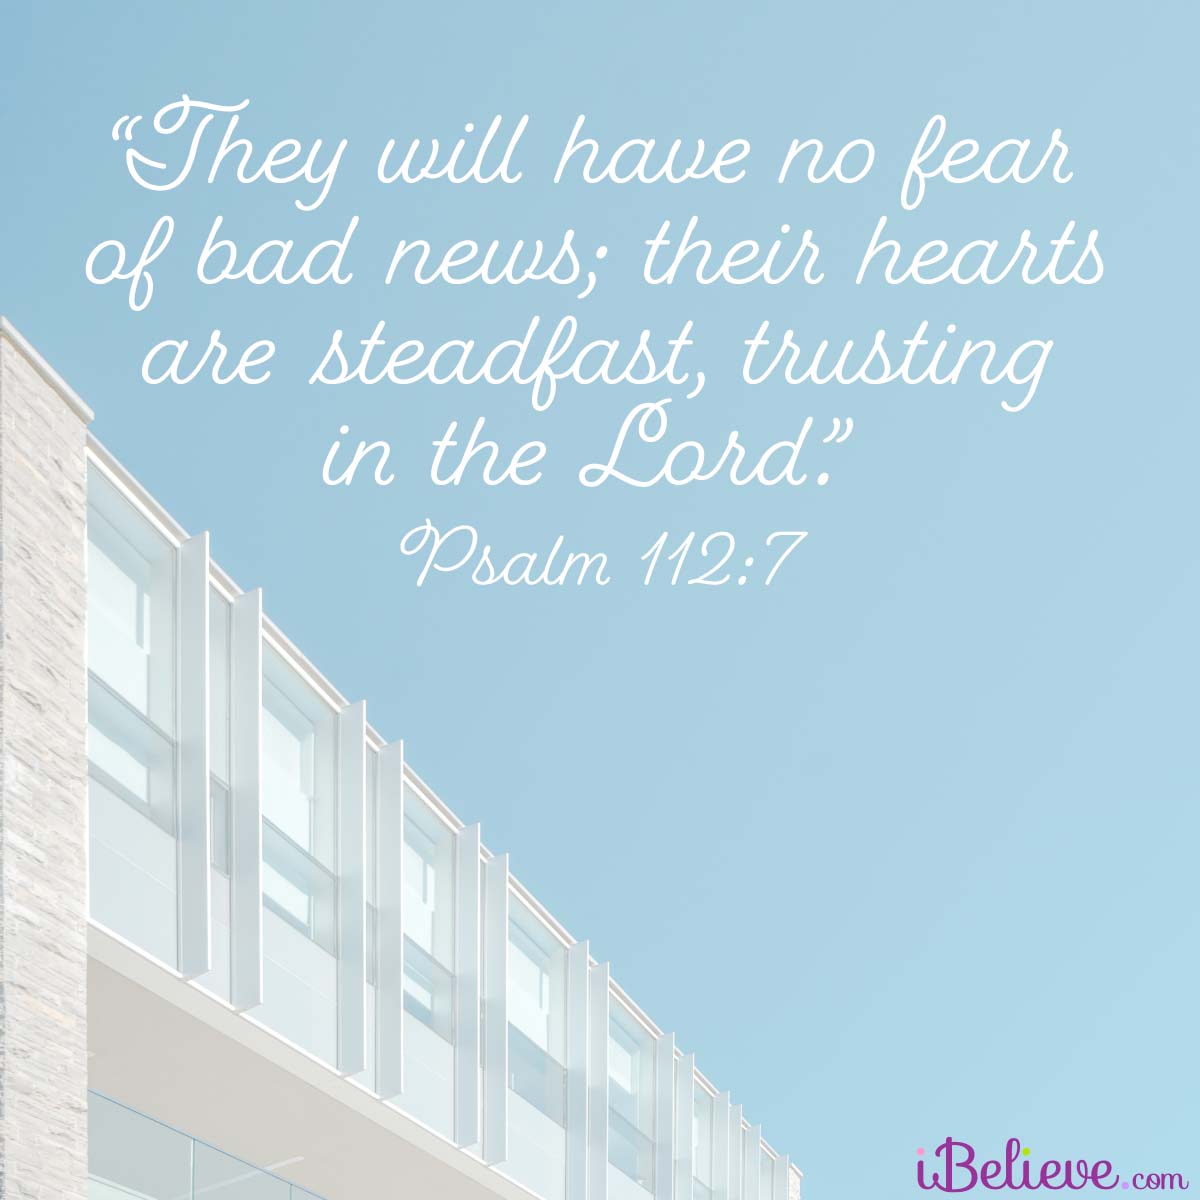 Psalm 117:2, inspirational images